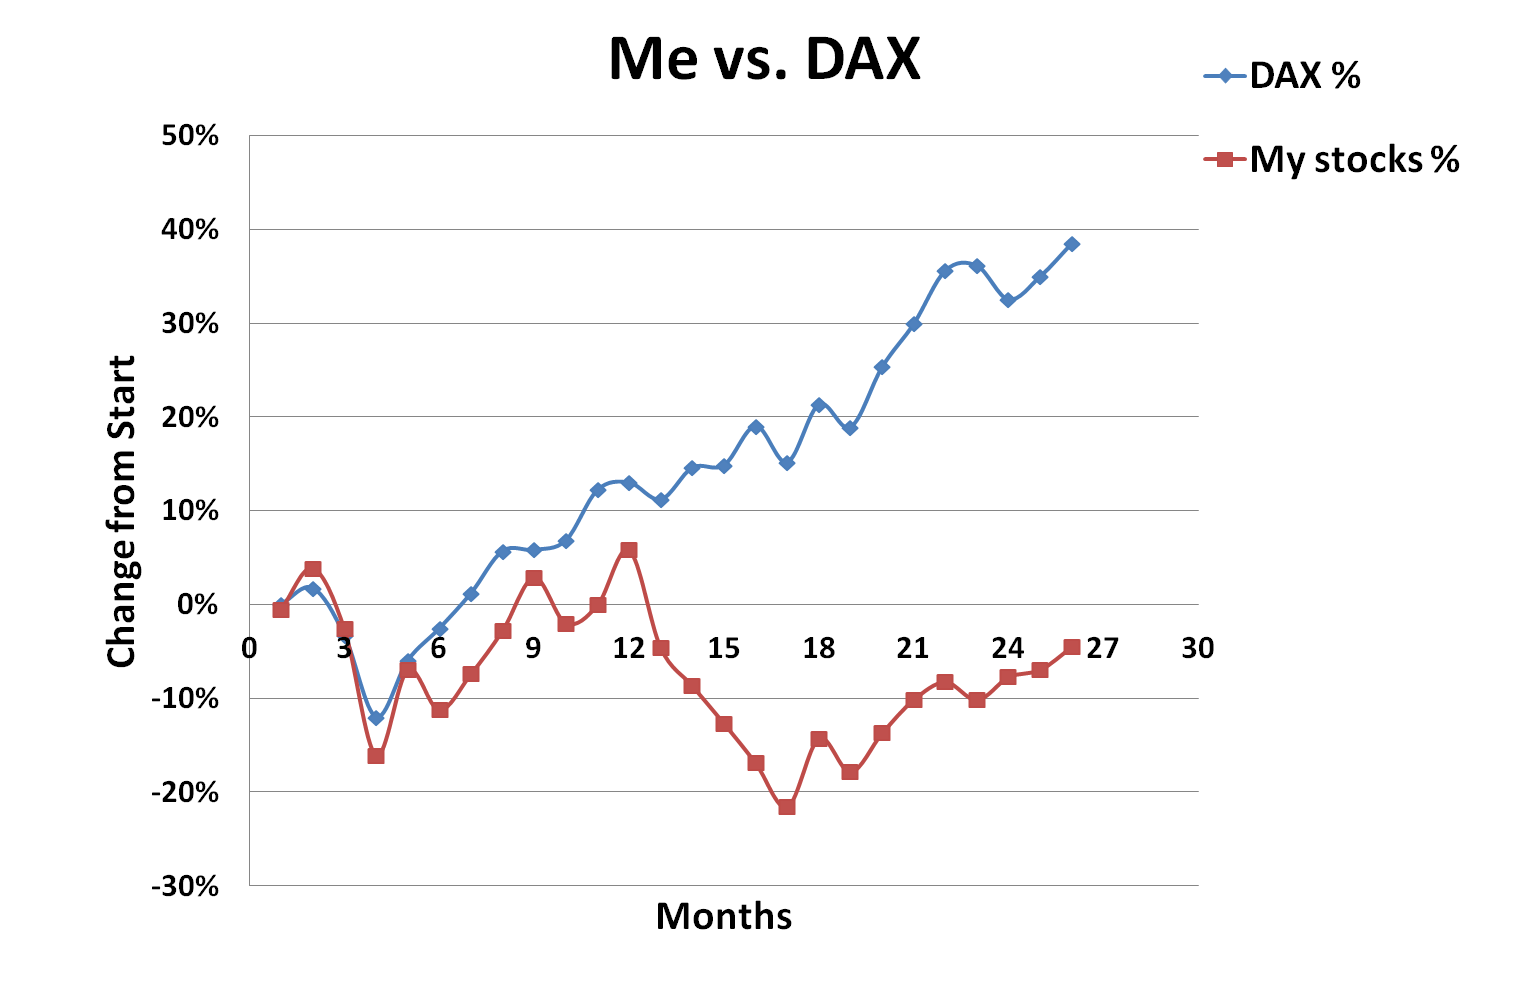 DAX, versus, Me, who beats who?